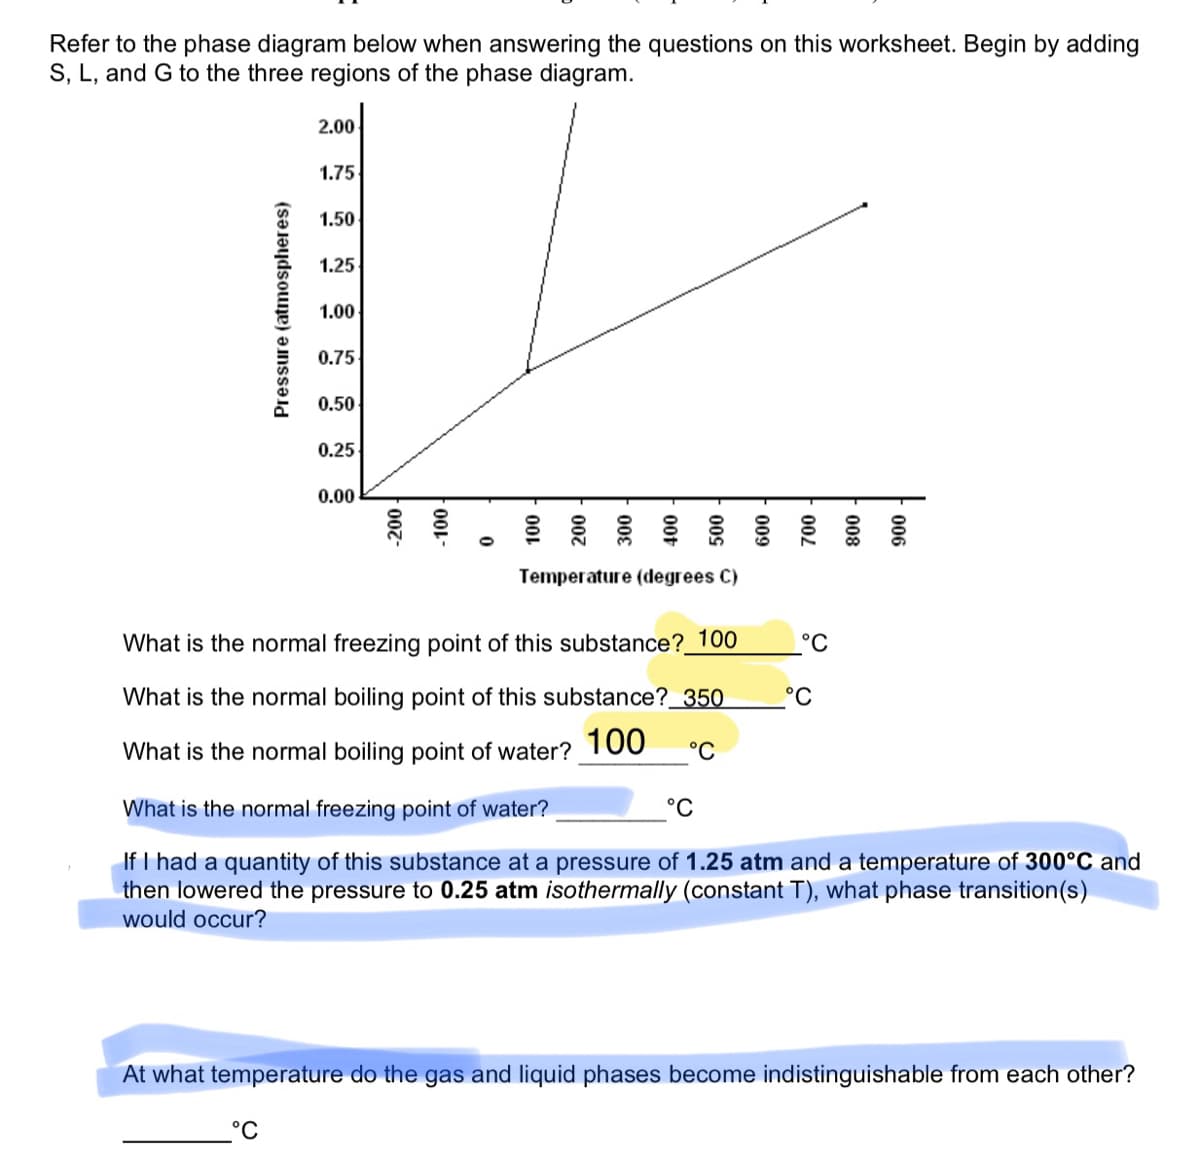 Refer to the phase diagram below when answering the questions on this worksheet. Begin by adding
S, L, and G to the three regions of the phase diagram.
2.00
1.75
1.50
1.25
1.00
0.75
0.50
0.25
0.00
Temperature (degrees C)
What is the normal freezing point of this substance?_100
°C
What is the normal boiling point of this substance?_350
°C
100
What is the normal boiling point of water?
°C
What is the normal freezing point of water?
°C
If I had a quantity of this substance at a pressure of 1.25 atm and a temperature of 300°C and
then lowered the pressure to 0.25 atm isothermally (constant T), what phase transition(s)
would occur?
At what temperature do the gas and liquid phases become indistinguishable from each other?
°C
006
008
Pressure (atmospheres)
